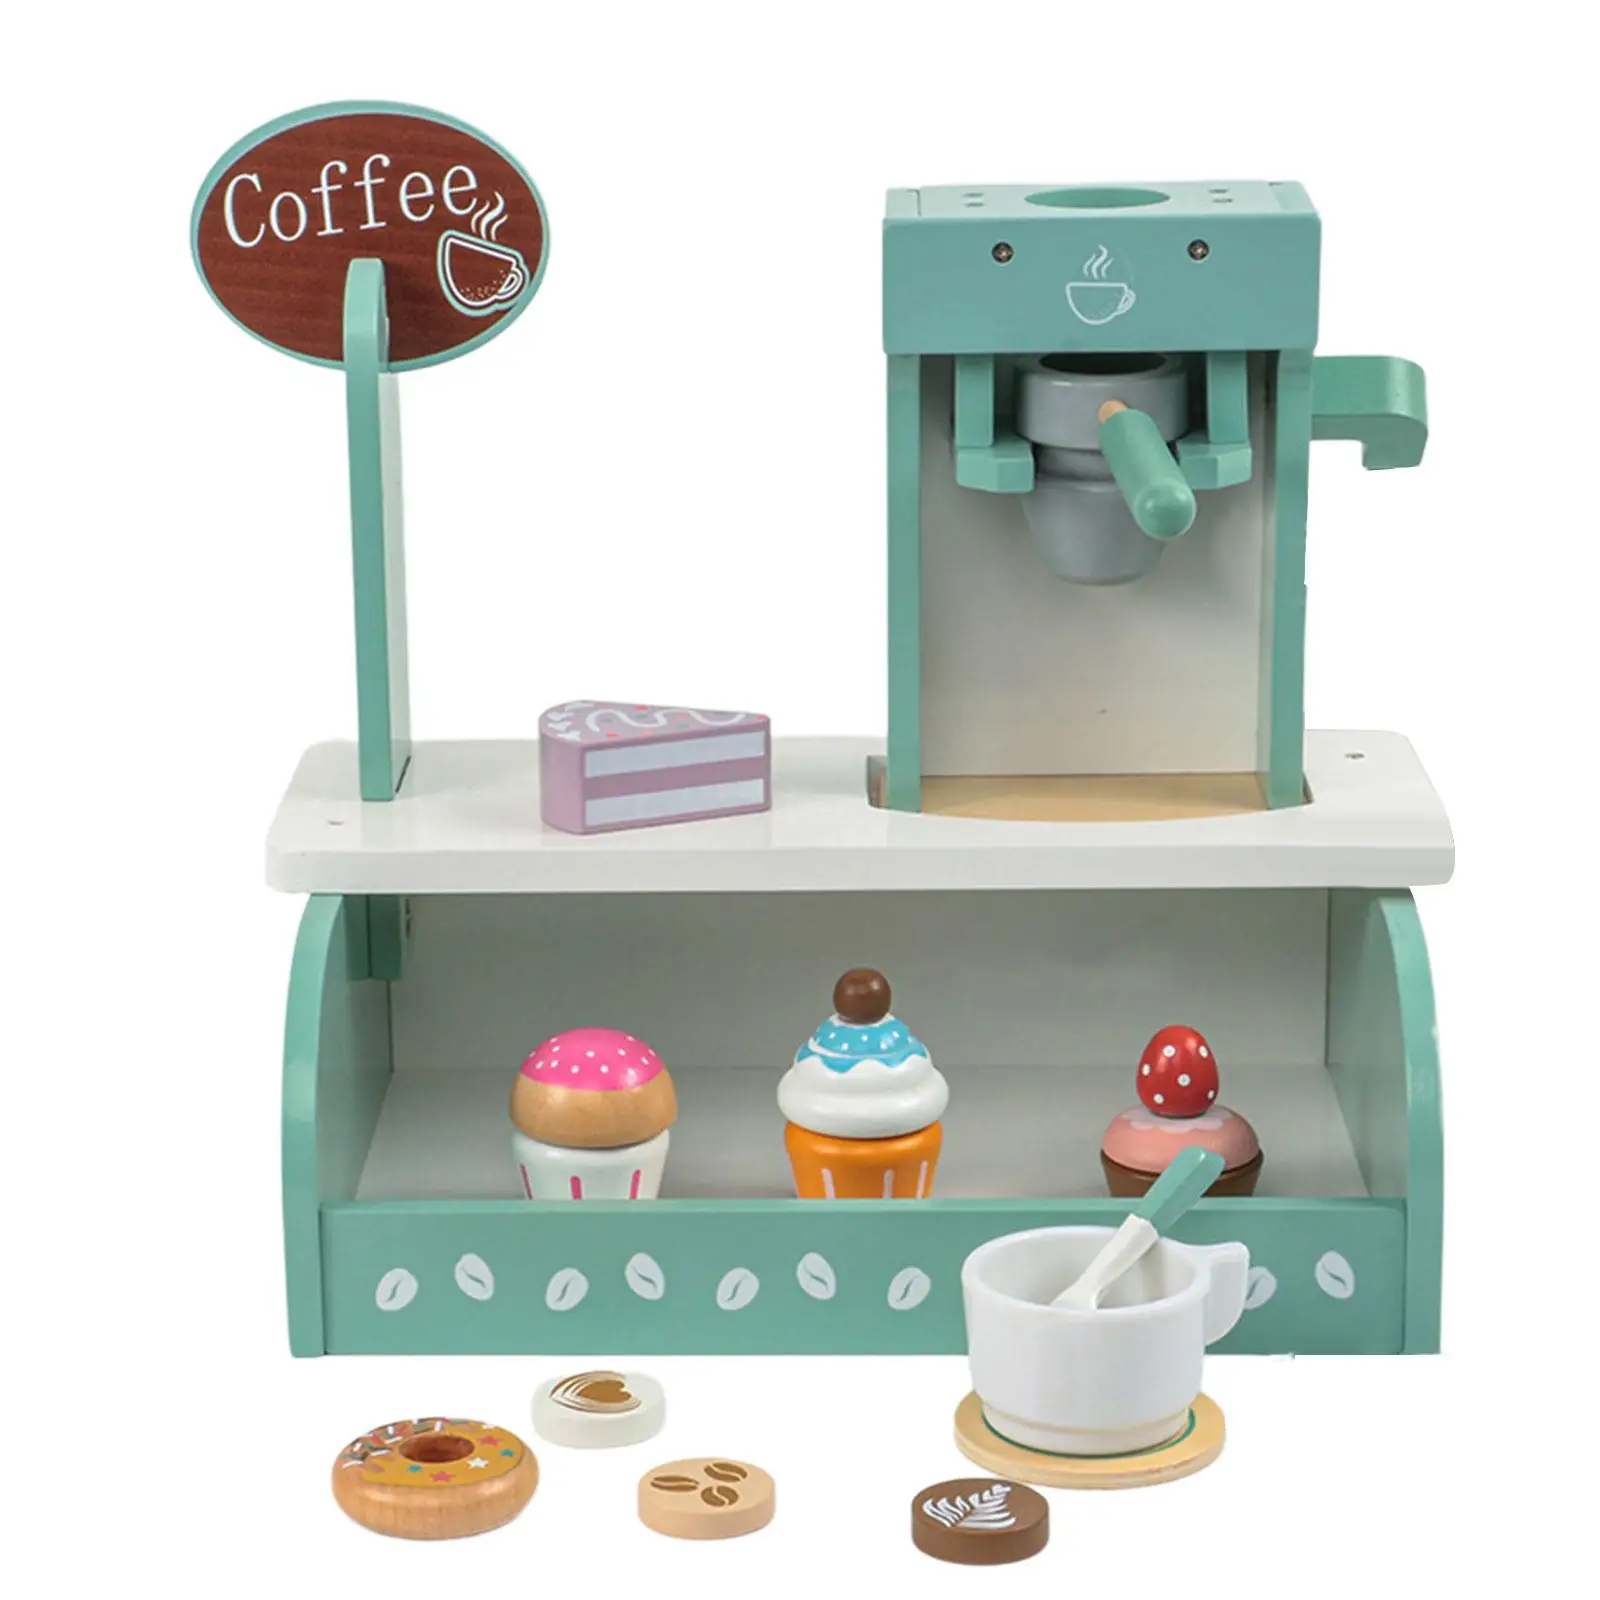 Kids Coffee Maker Playset Toy Wooden Coffee Maker Set for 3+ Year Old